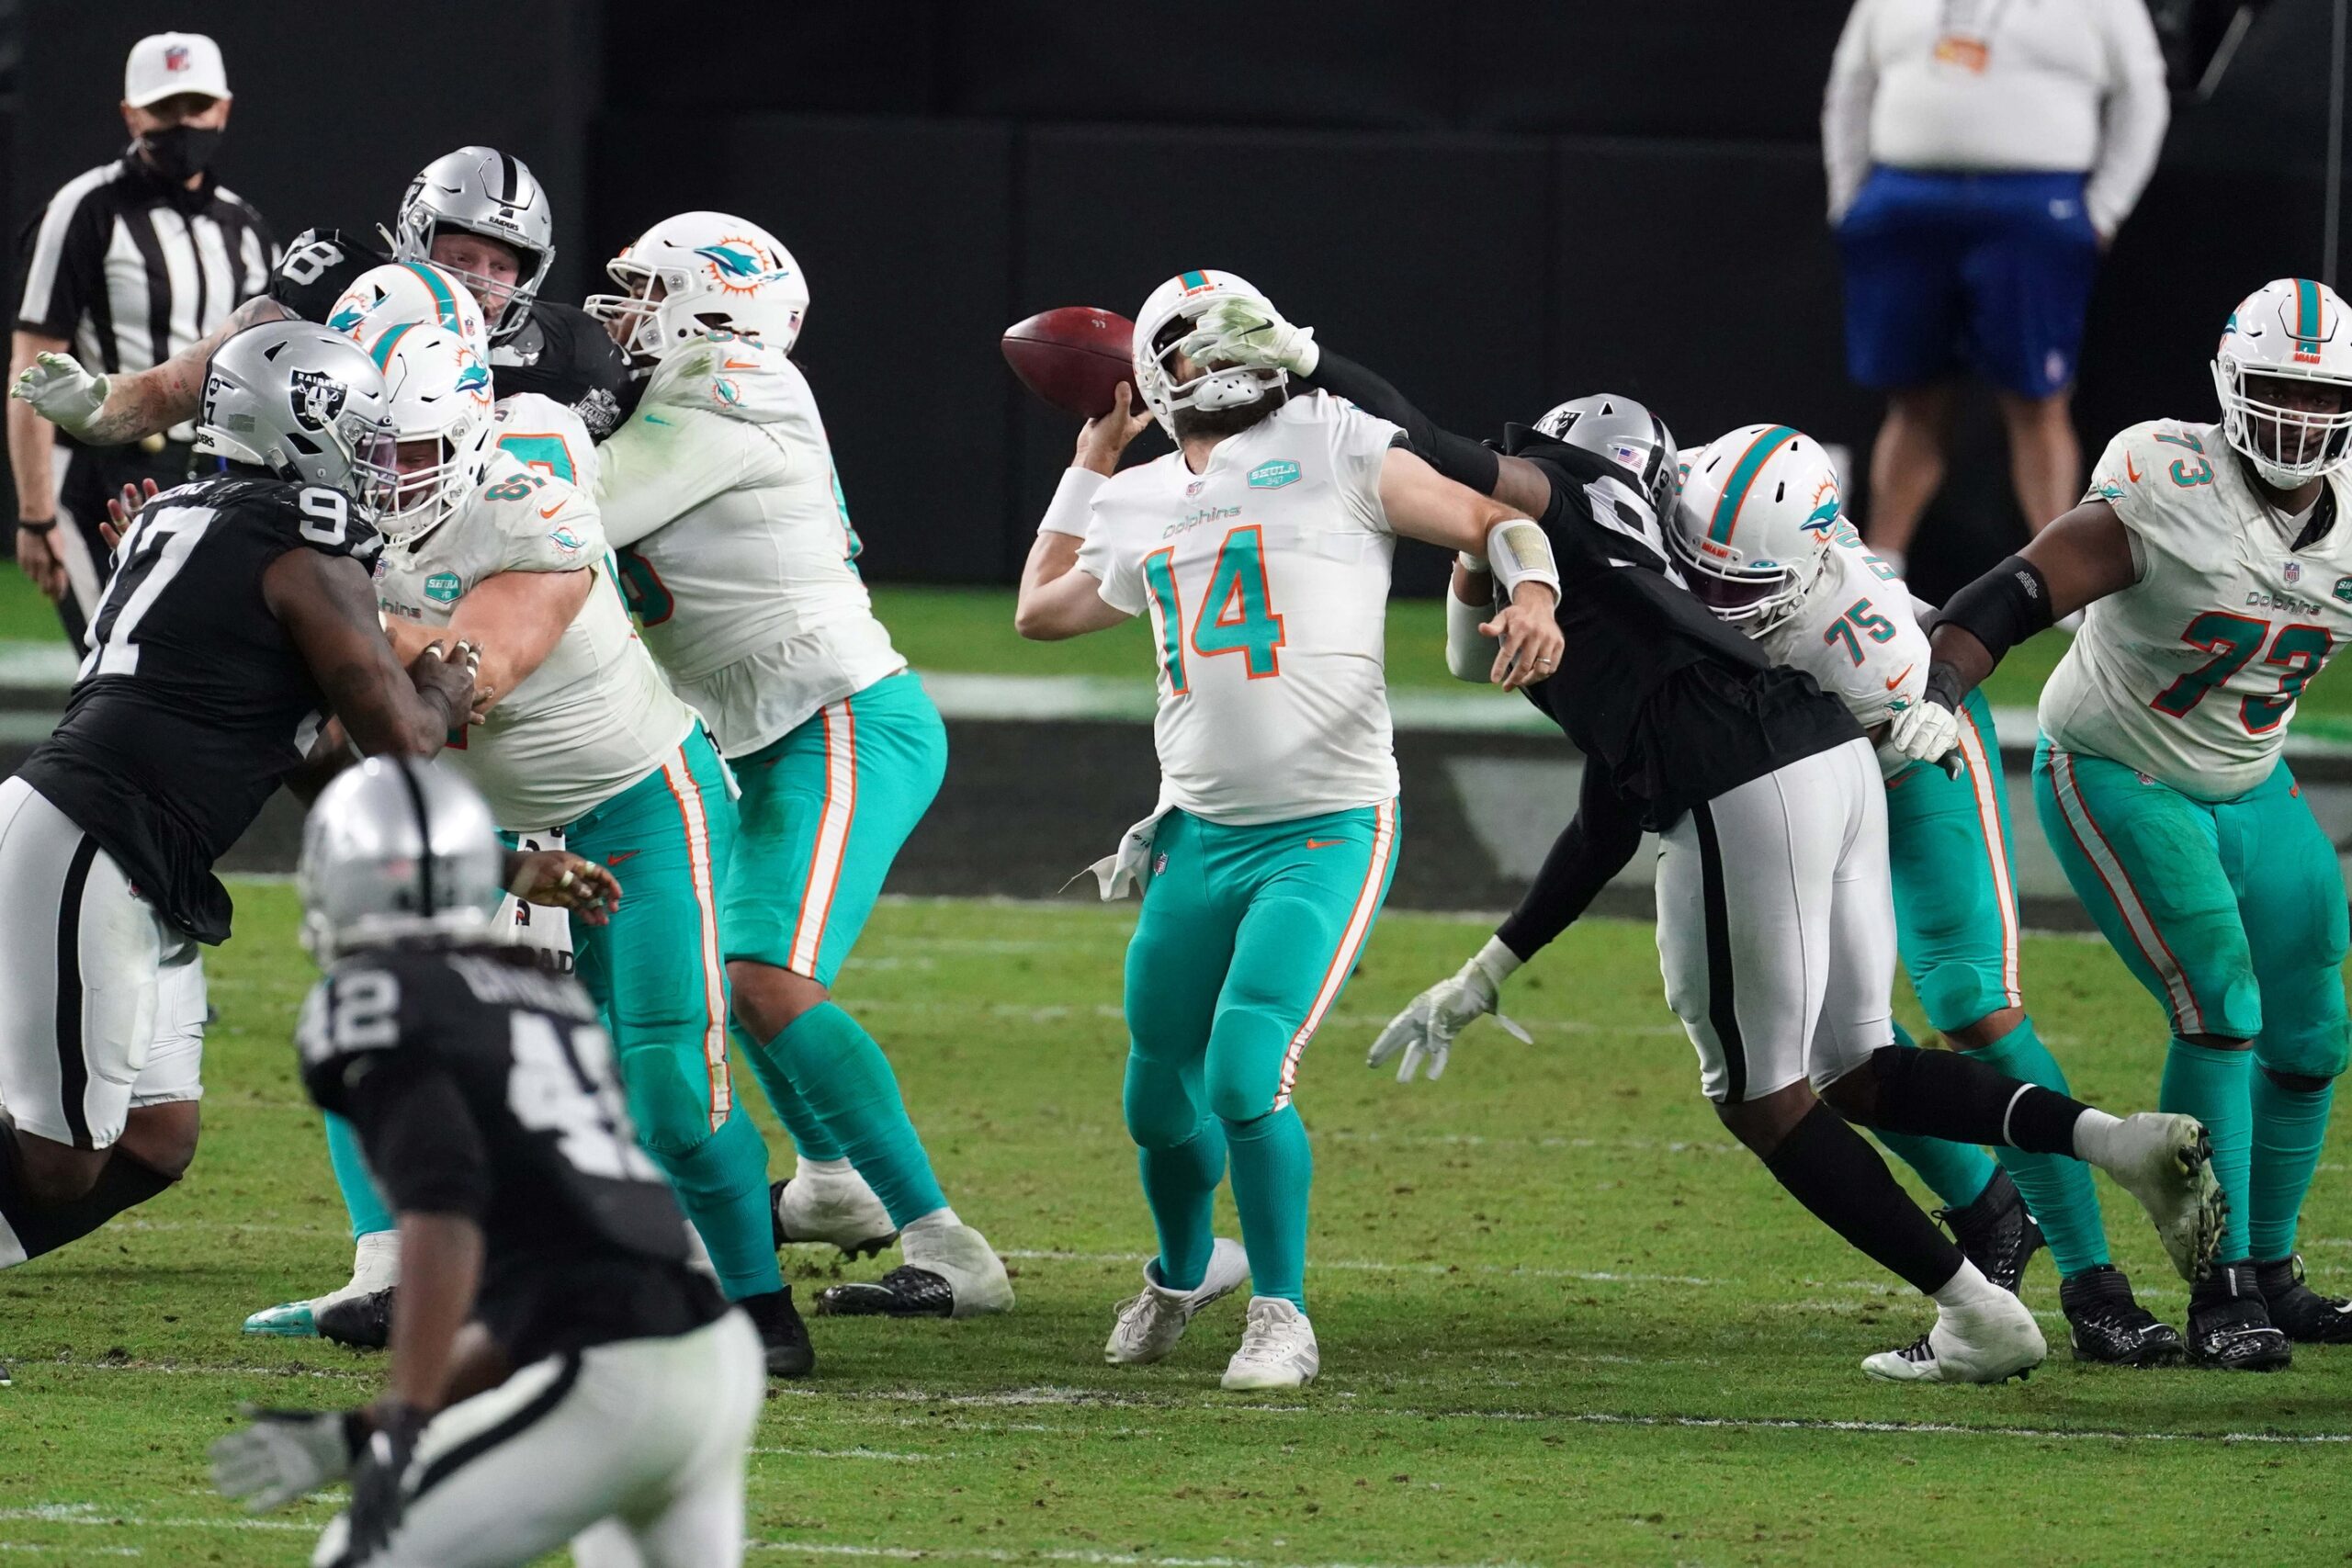 Highlights: Watch the best moments from the Raiders' 26-20 win